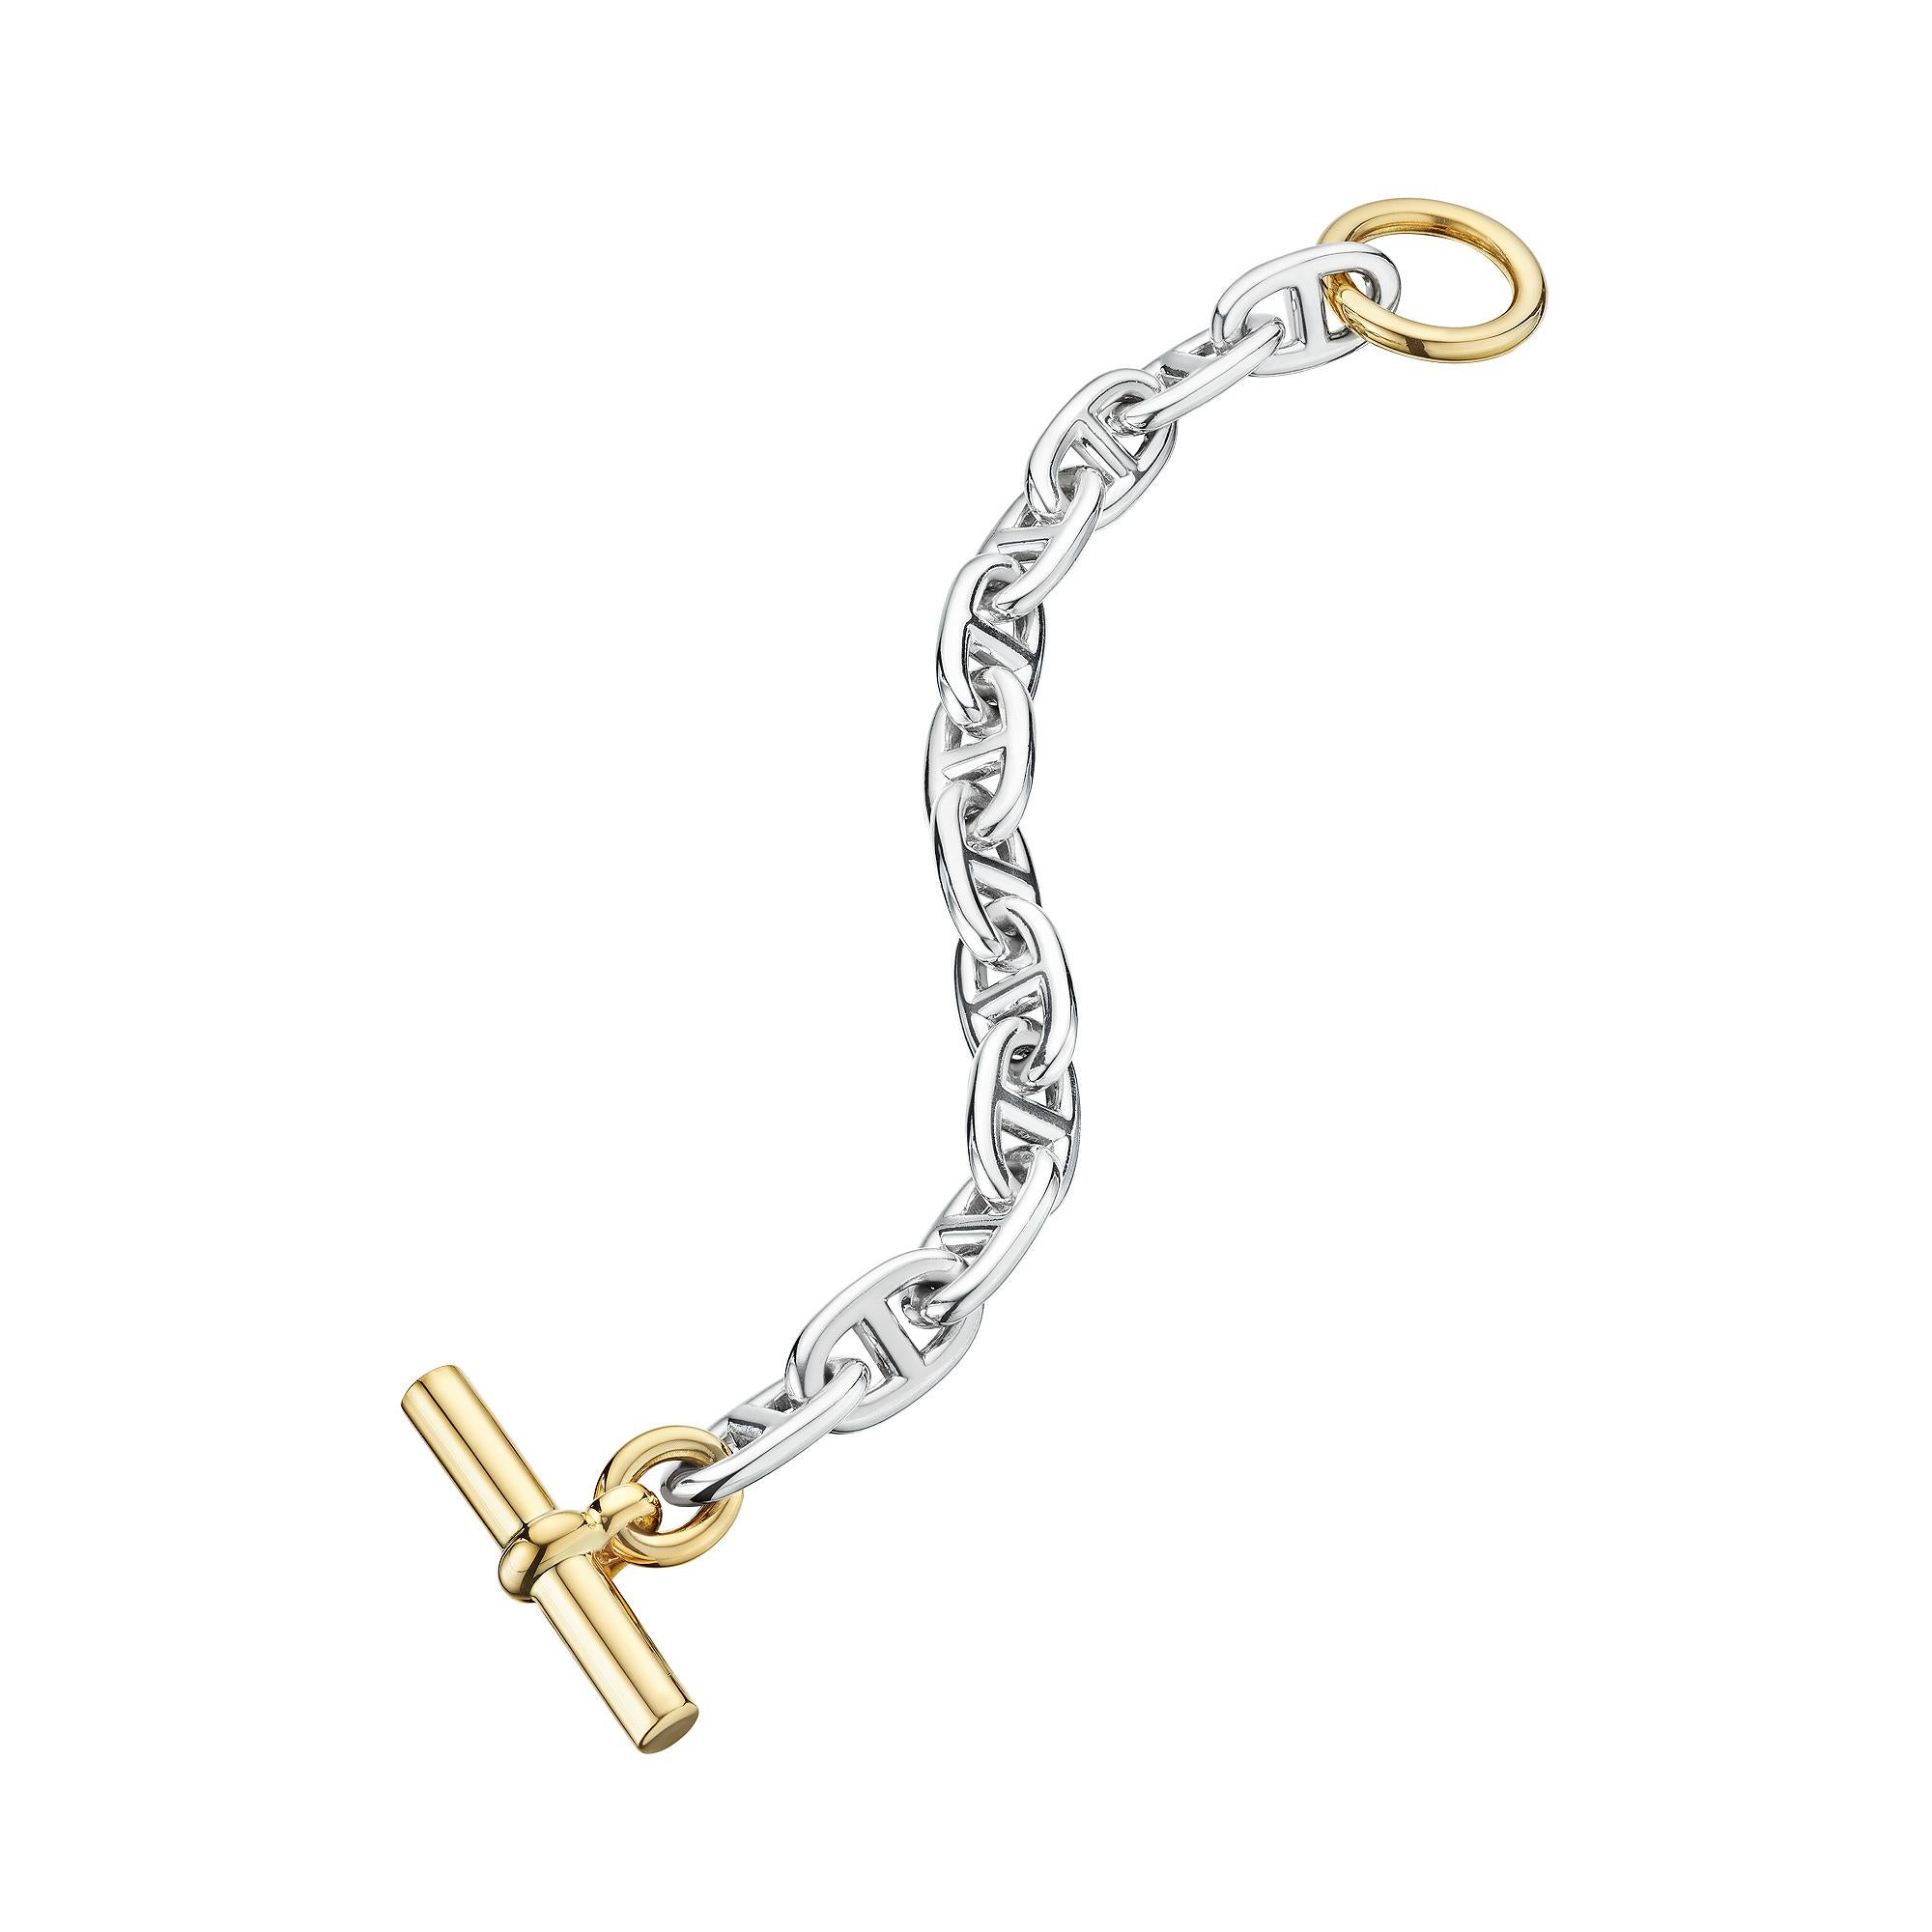 Designed with the captivating combination of 18 karat yellow gold and sterling silver this Hermes Paris modernist chaine d'arce toggle link bracelet is a unique collectible.  With 12 silver anchor chain links and a polished 18 karat yellow gold